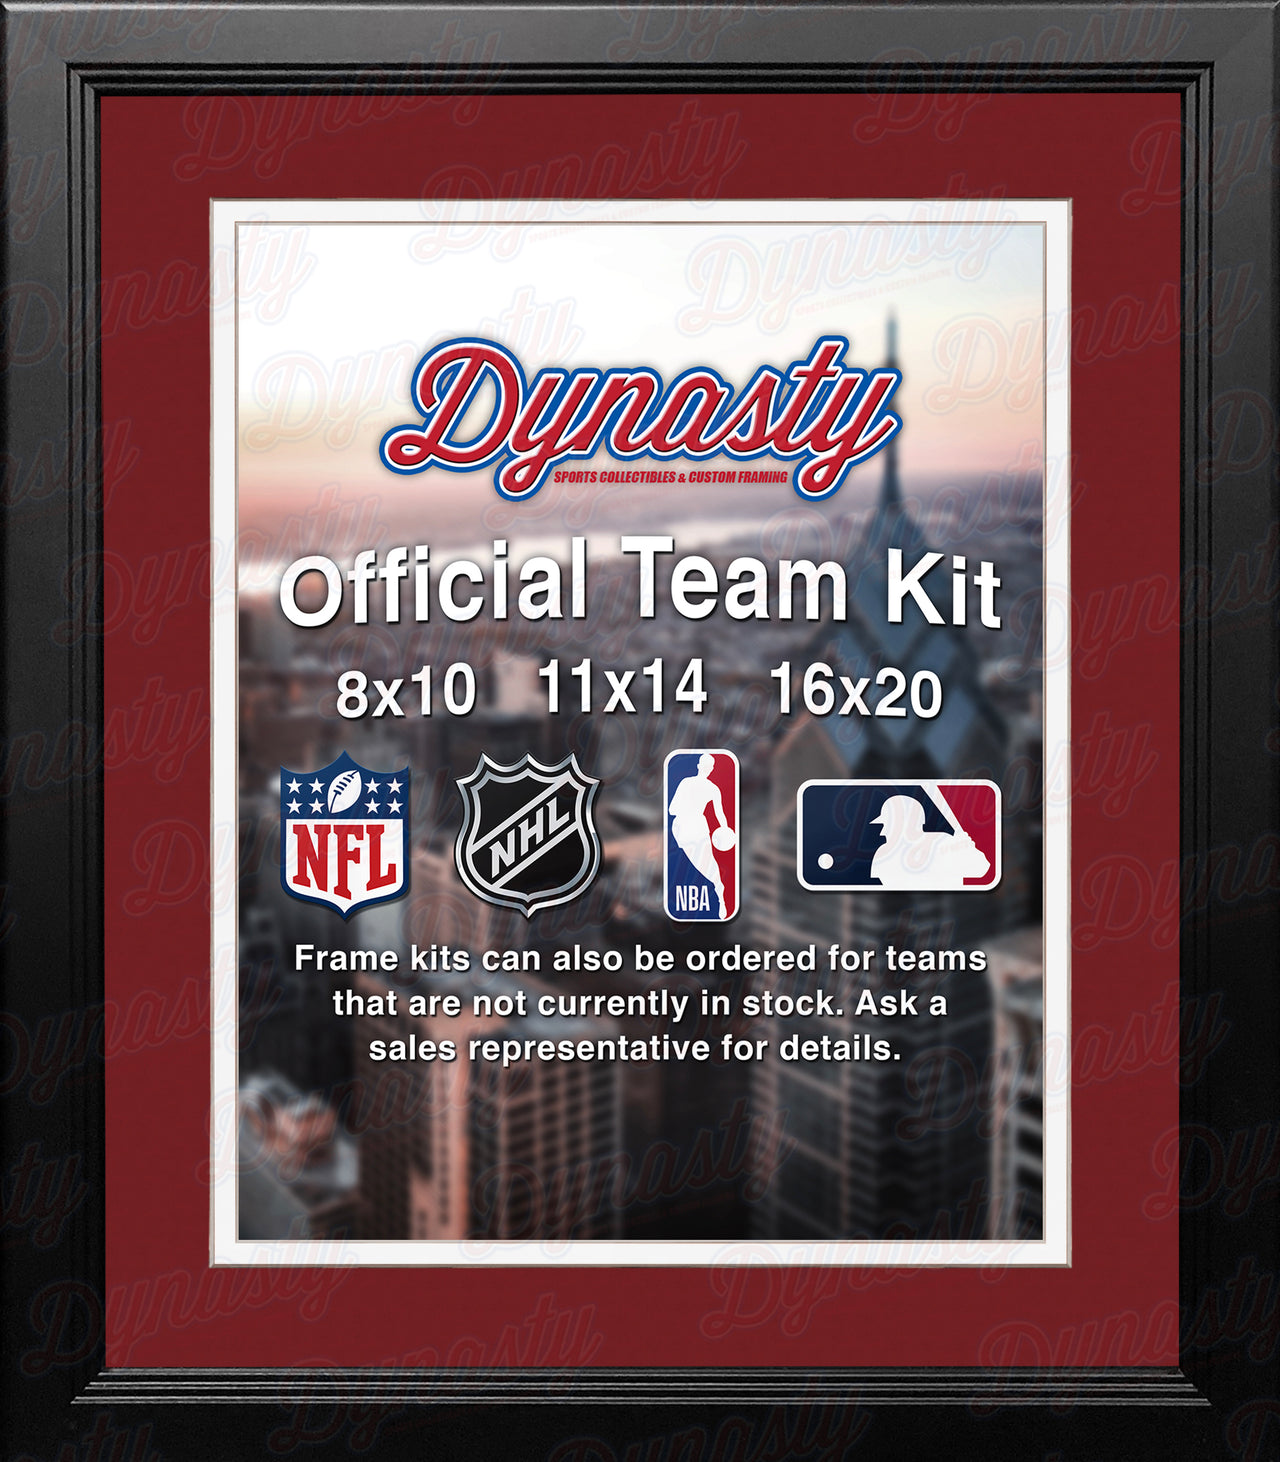 NHL Hockey Photo Picture Frame Kit - Montreal Canadiens (Red Matting, White Trim) - Dynasty Sports & Framing 